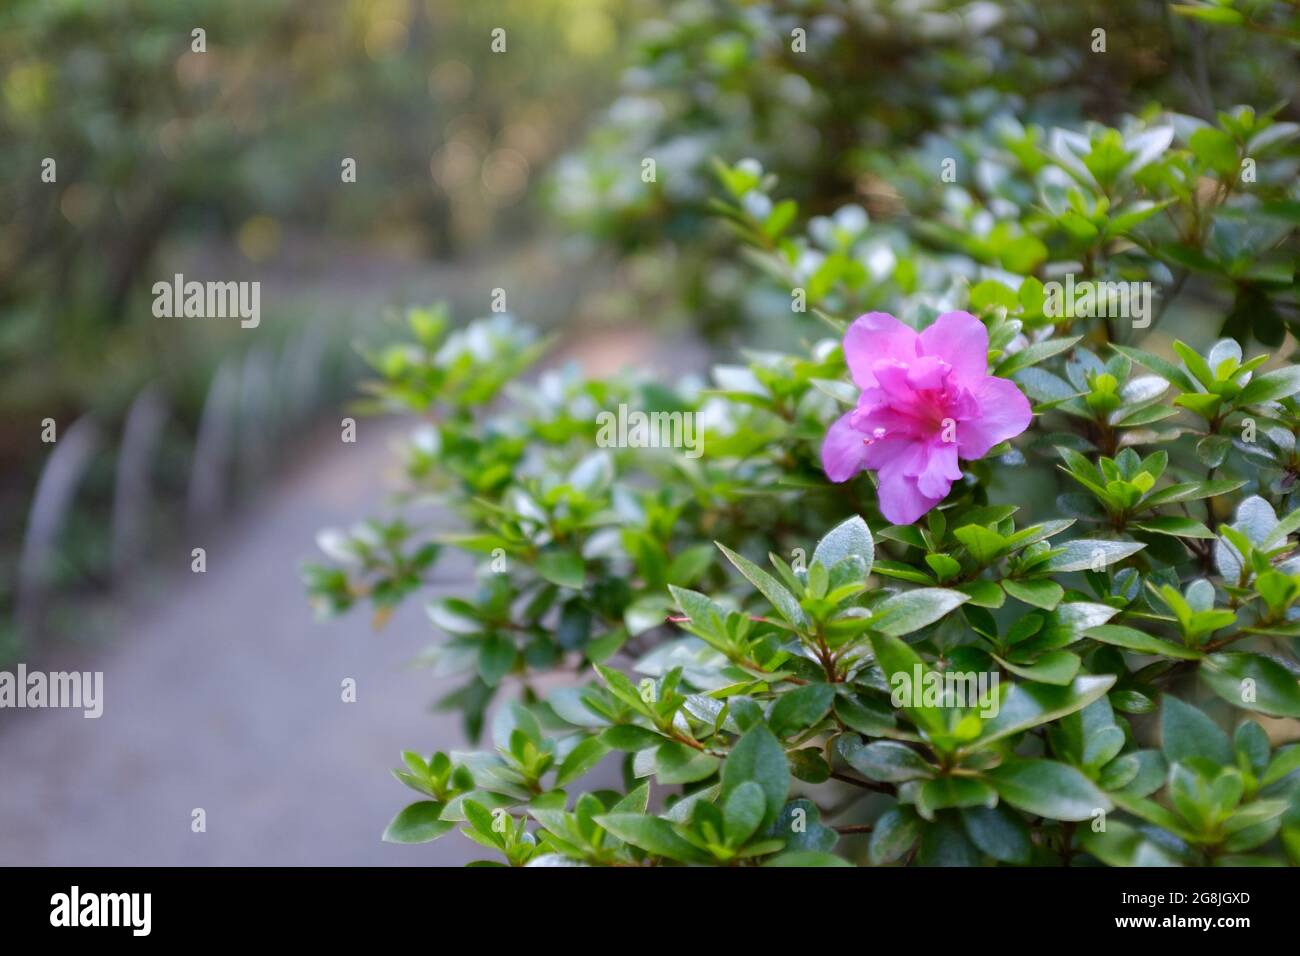 Purple flower blooming on a lush rhododendron shrub Stock Photo